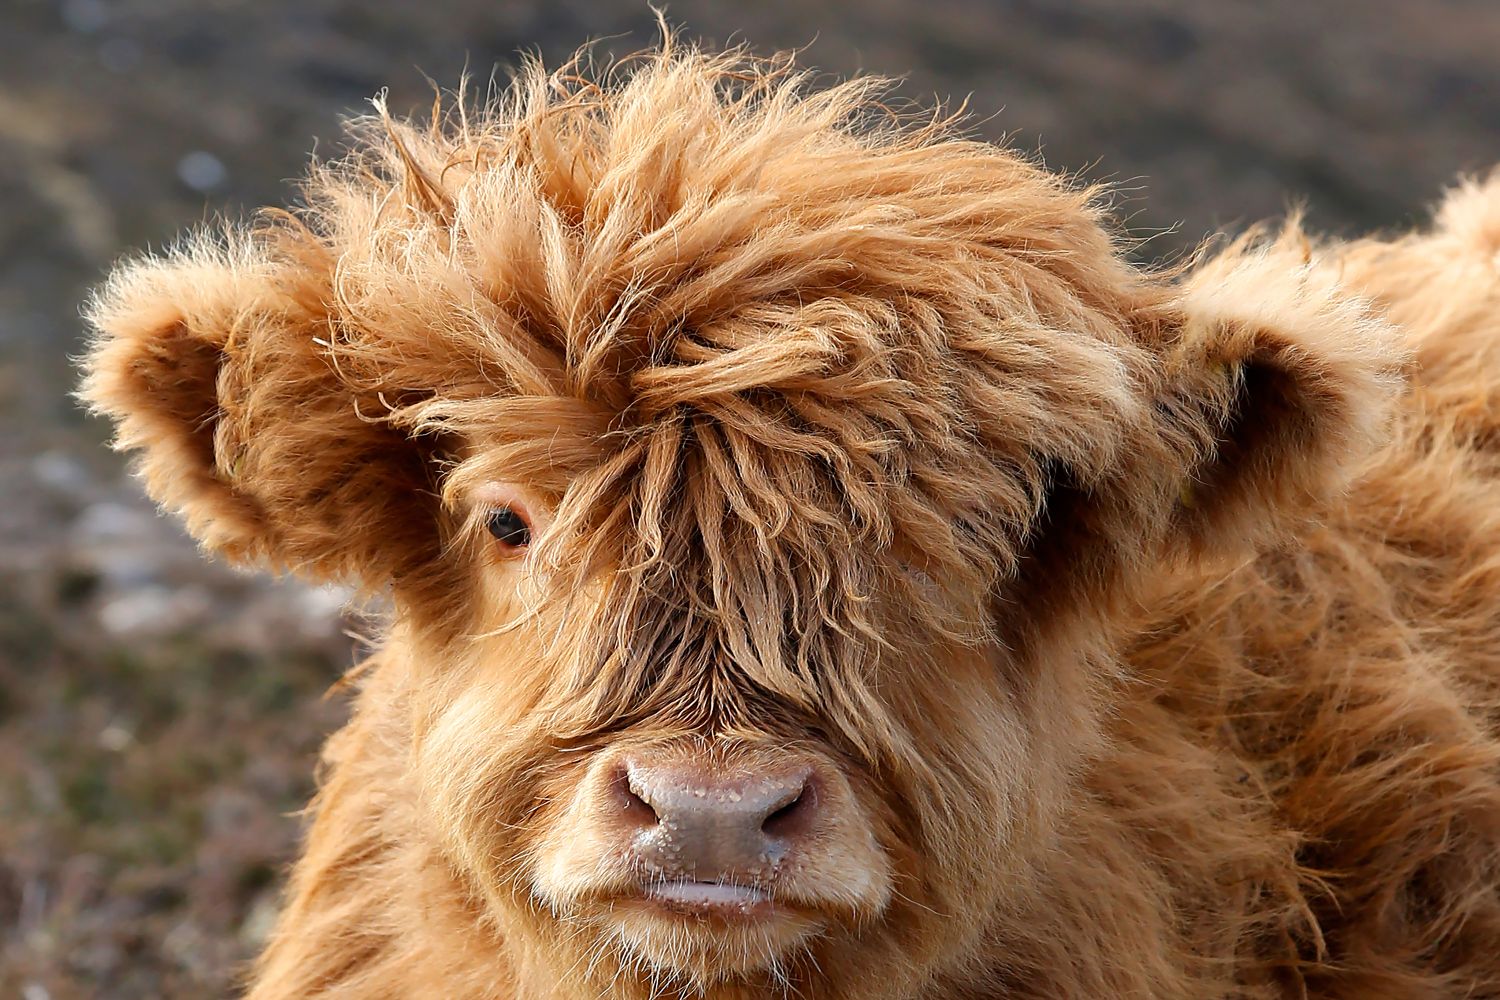 Highland cow the cutest thing ever by Wildlife photographer Martin Lawrence